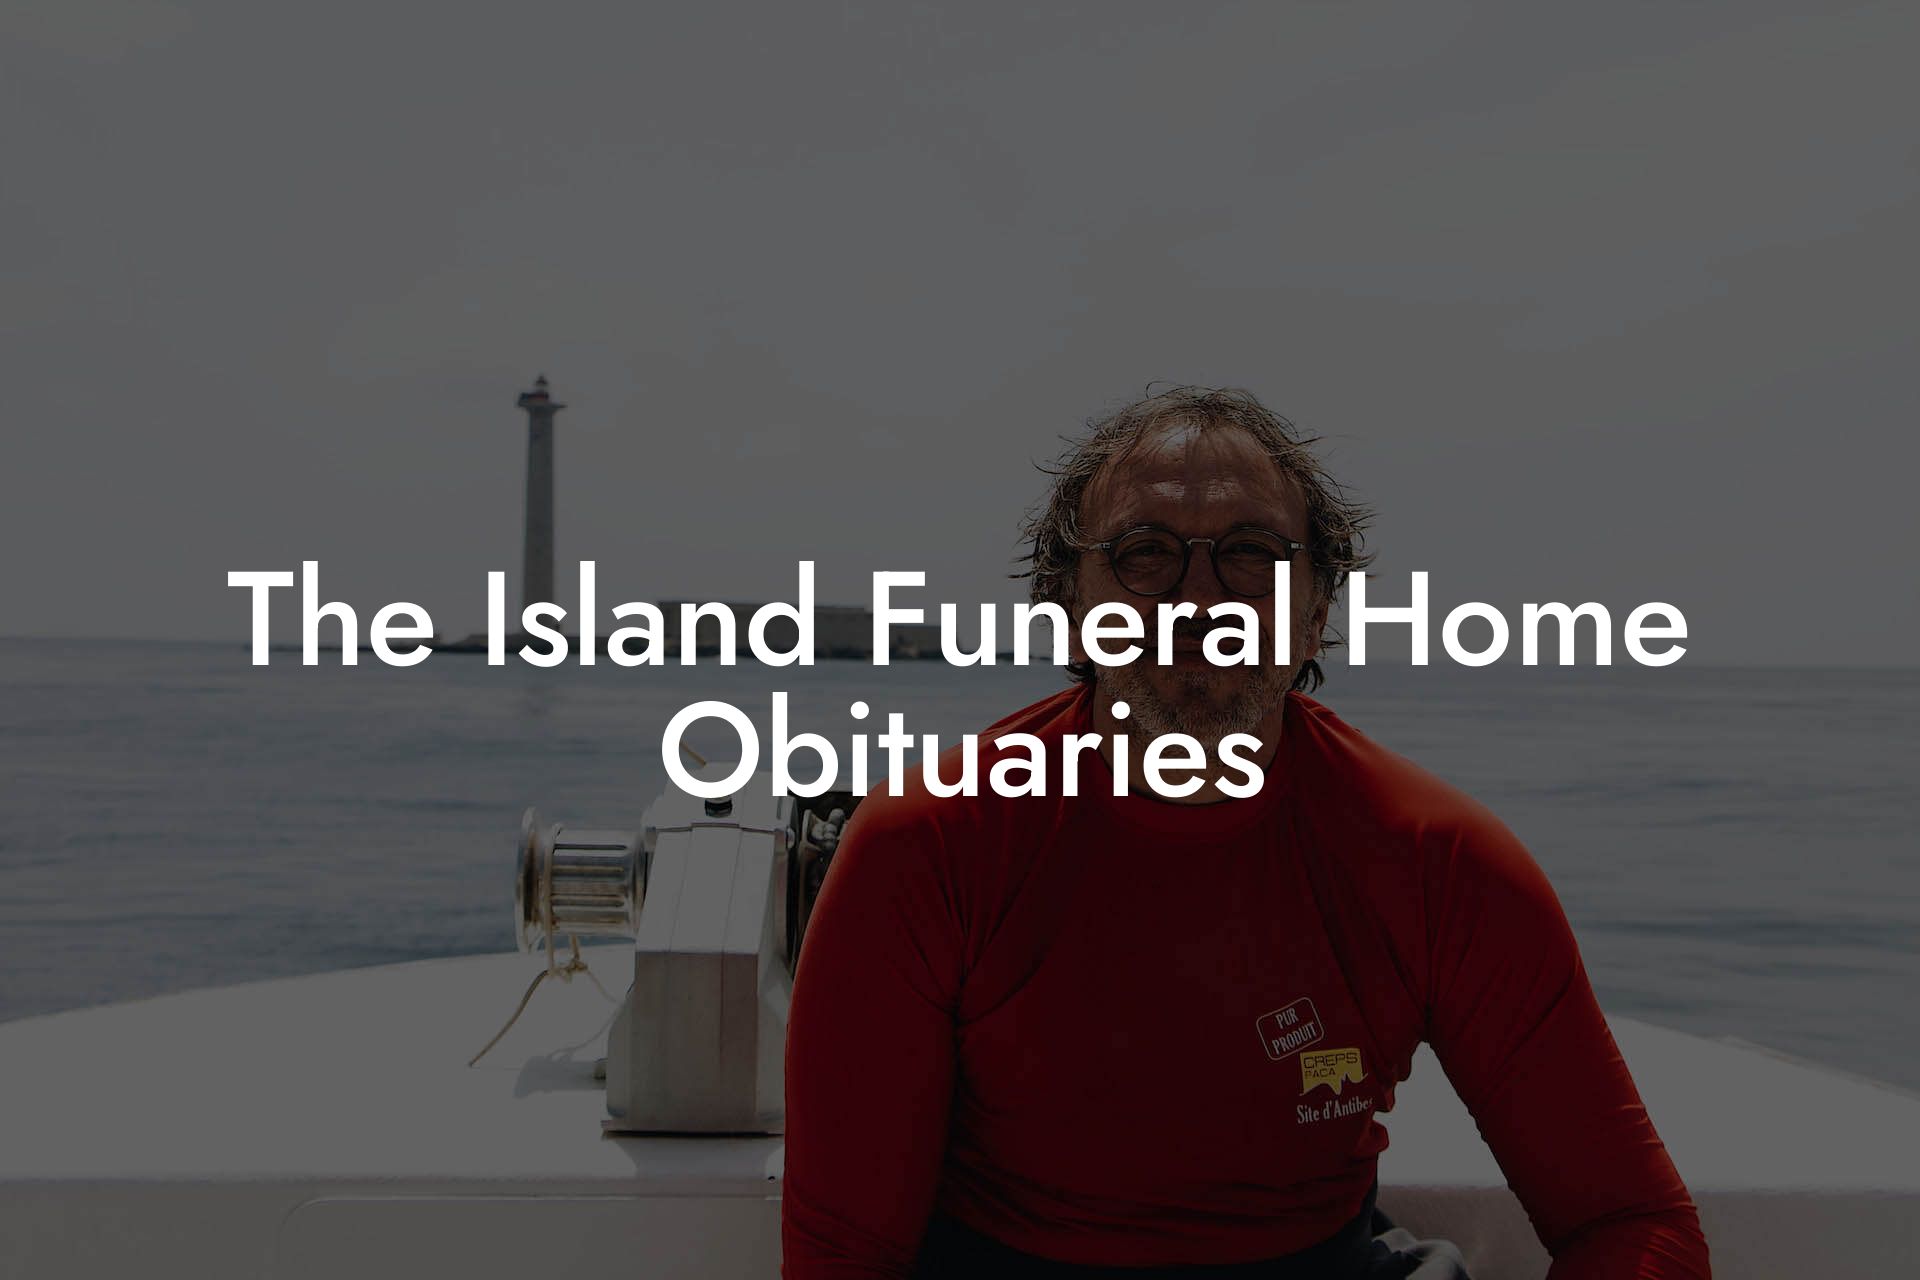 The Island Funeral Home Obituaries